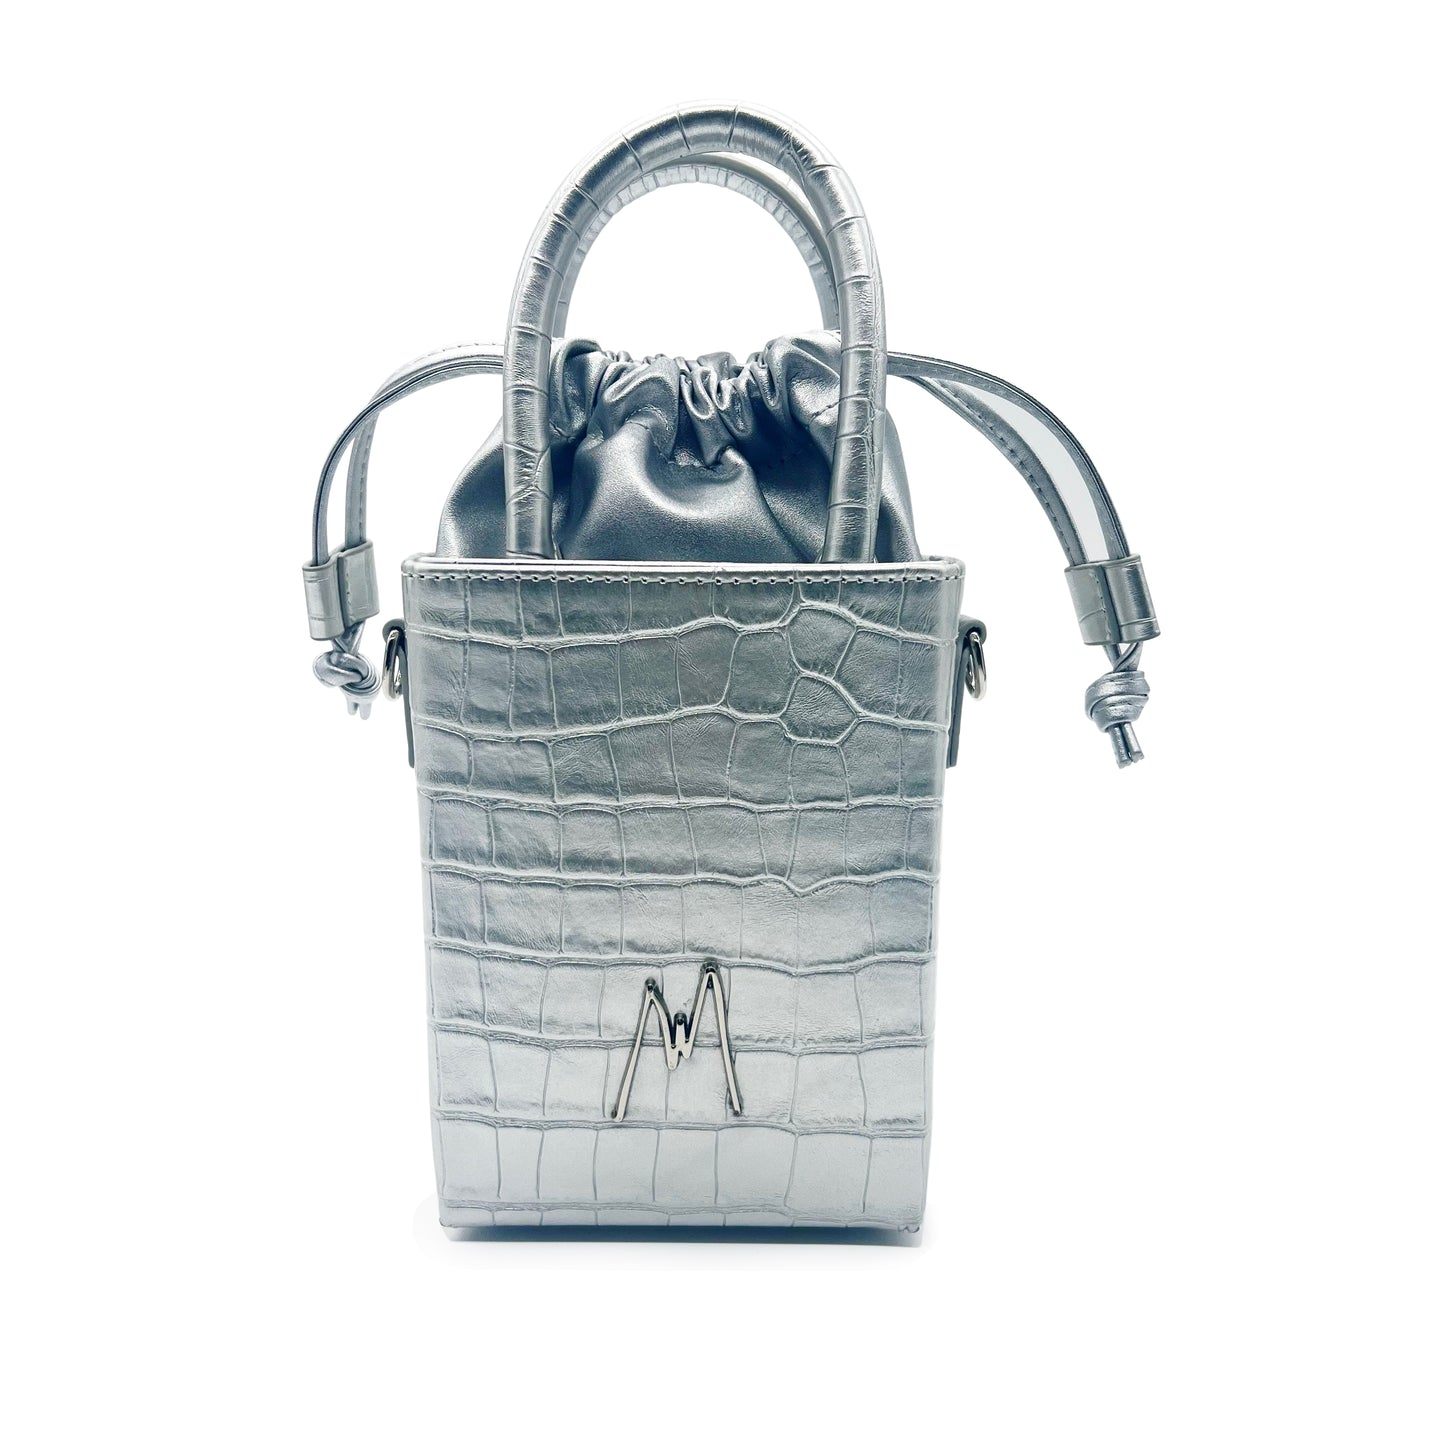 "SMALL LEATHER TOTE"  CROCODILE EMBOSSED - STERLING SILVER